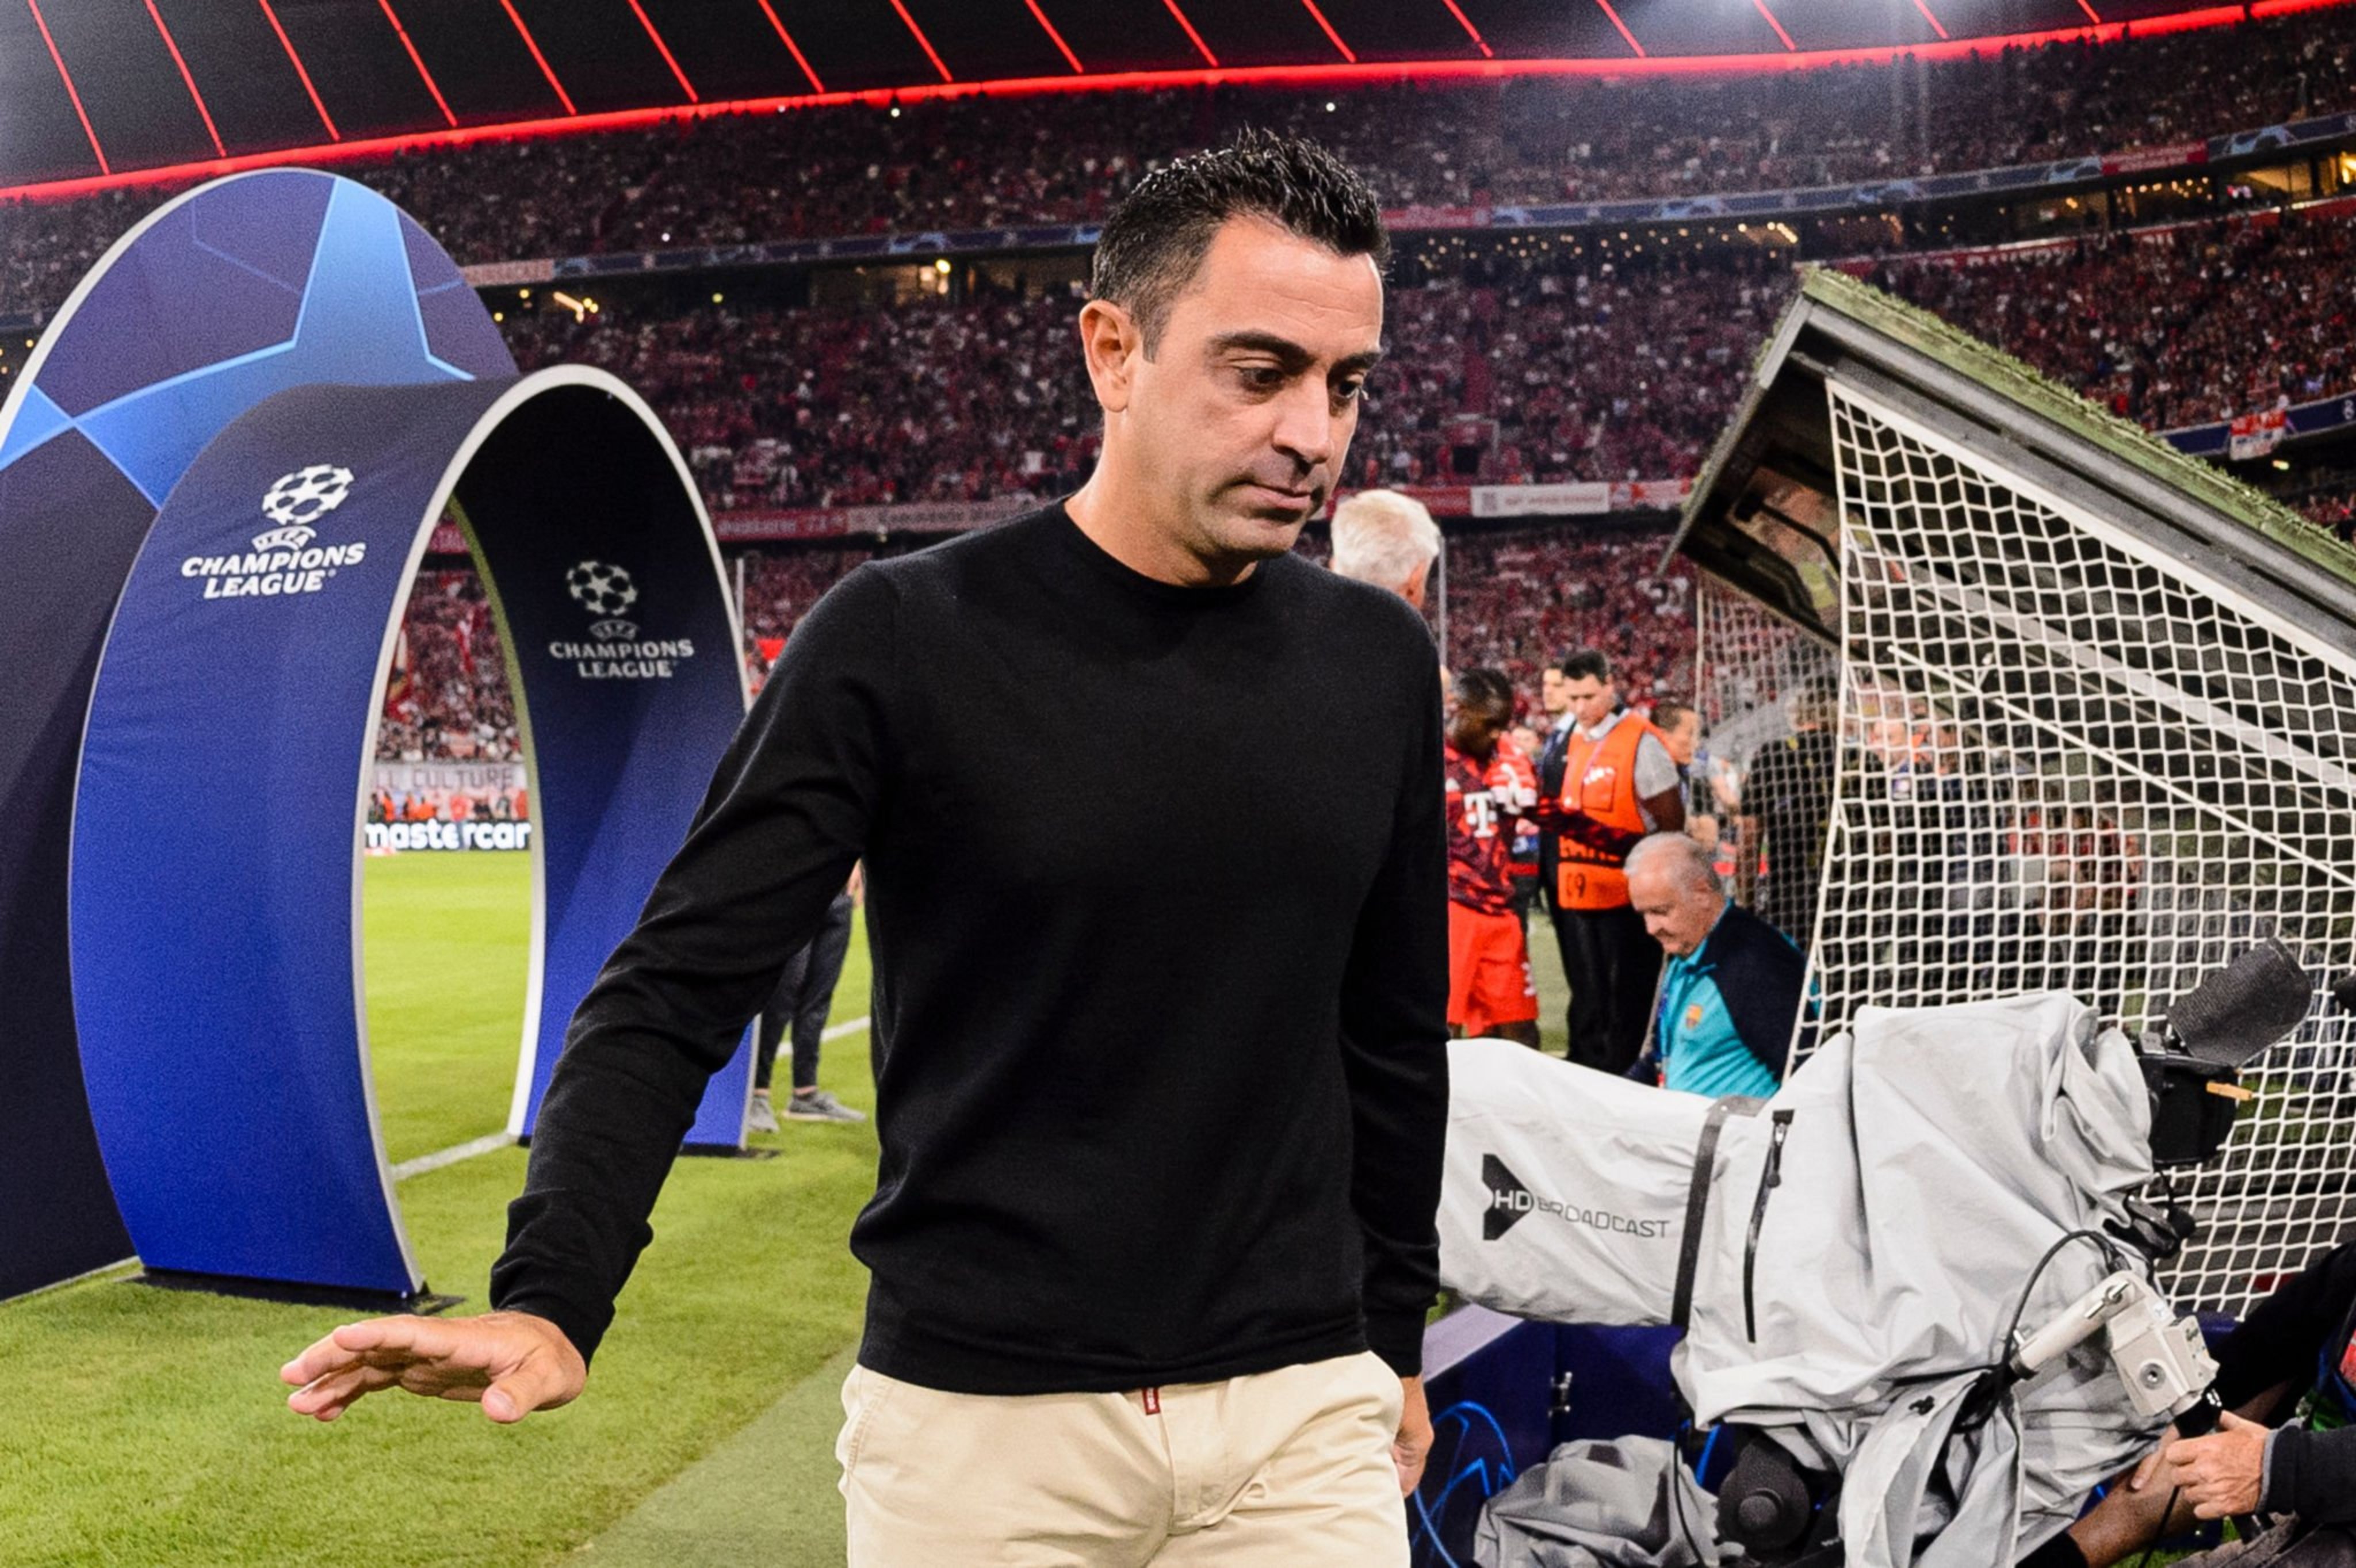 Real Madrid vs Barcelona LIVE: Xavi FACES El Clasico TEST, Barca Legend's Managerial Career Faces UNCERTAINTY amidst Debacles - Check Out